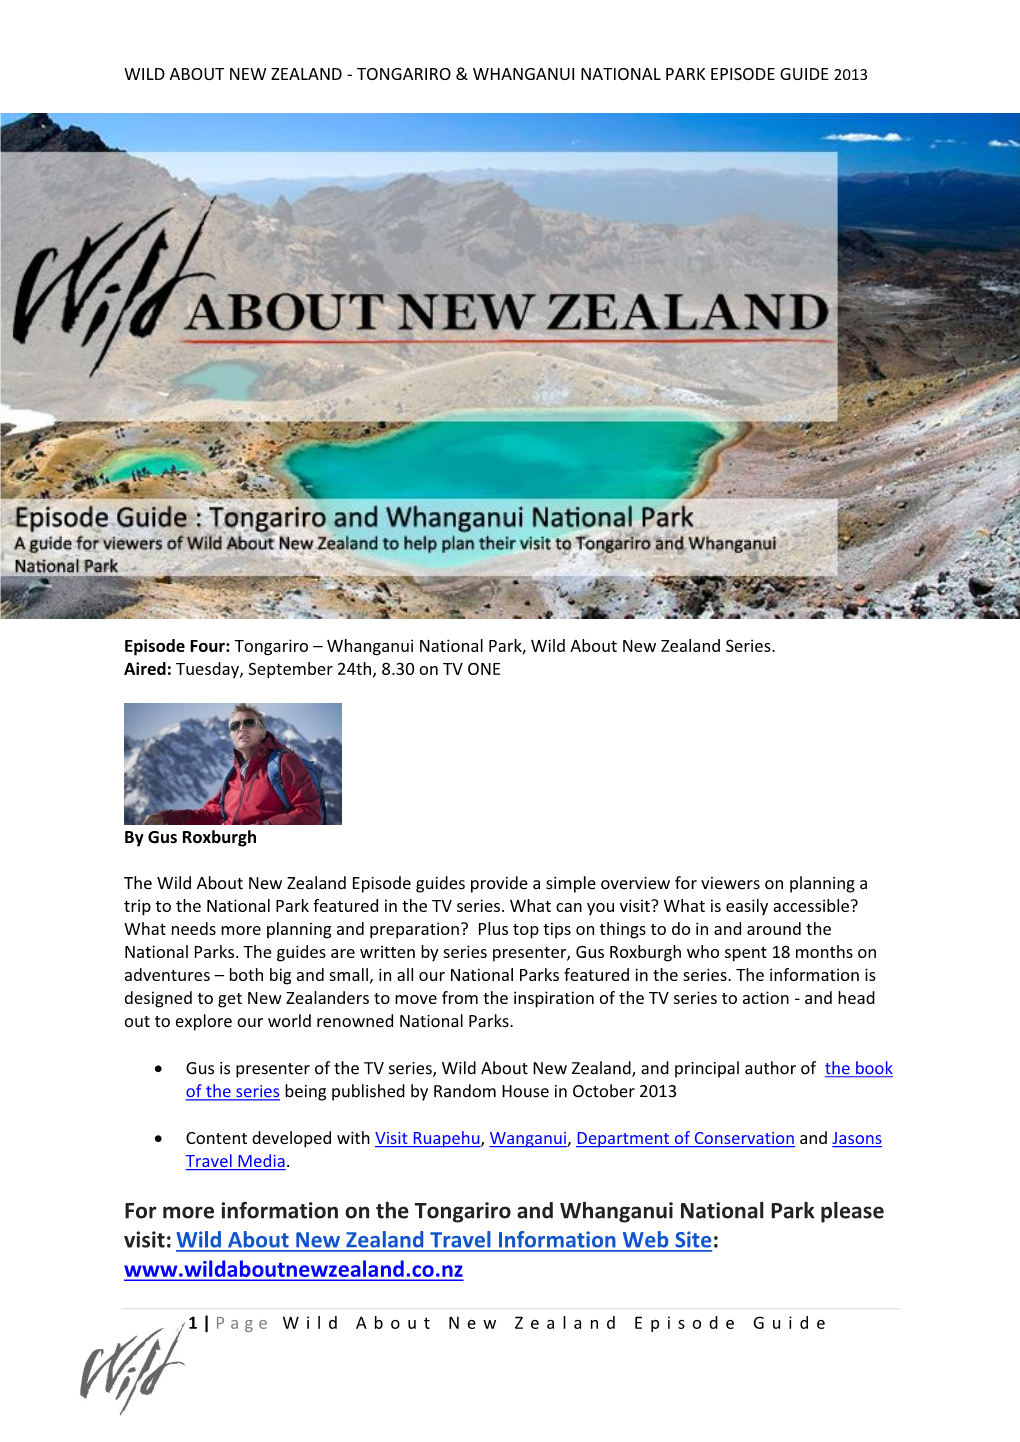 For More Information on the Tongariro and Whanganui National Park Please Visit:Wild About New Zealand Travel Information Web